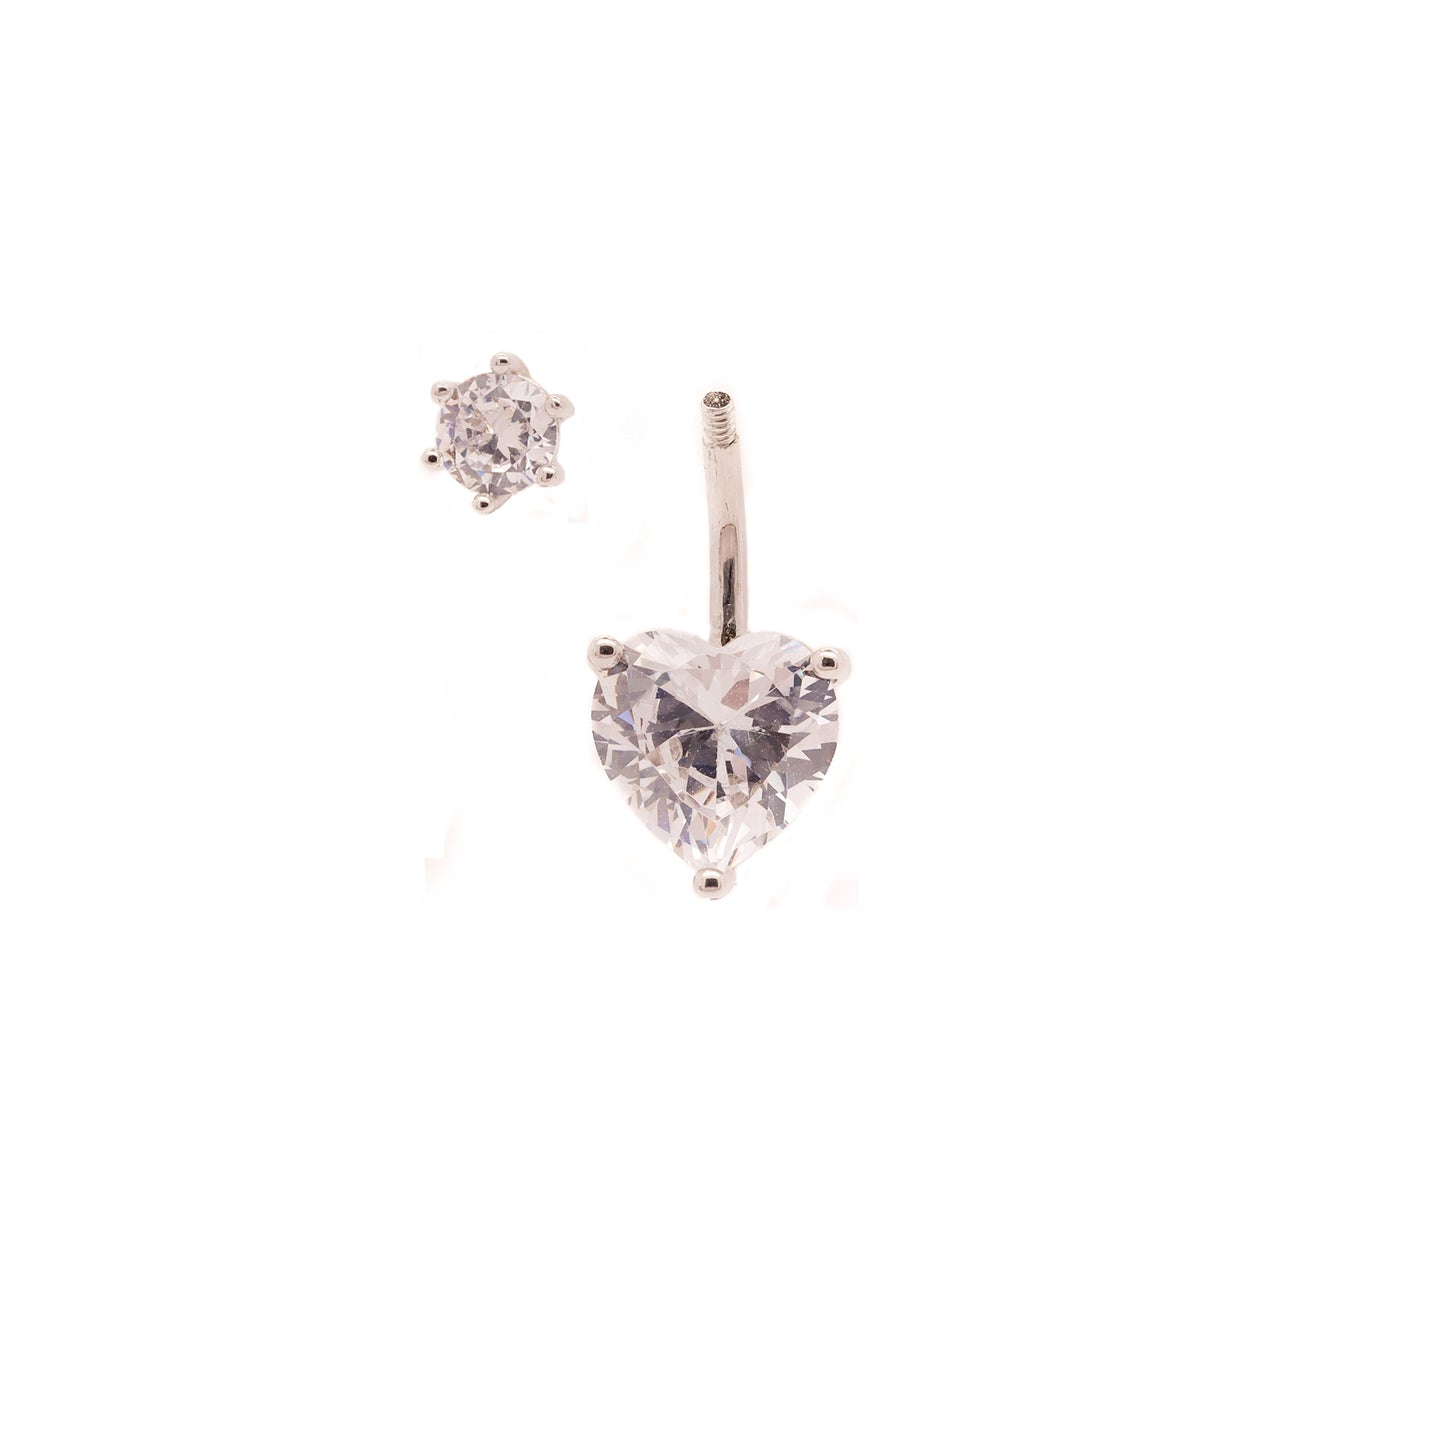 Solid 925 Silver | Solitaire Heart-shaped Stone Belly Ring | 6mm 1/4" 8mm 5/16" 10mm 3/8" - Sturdy South